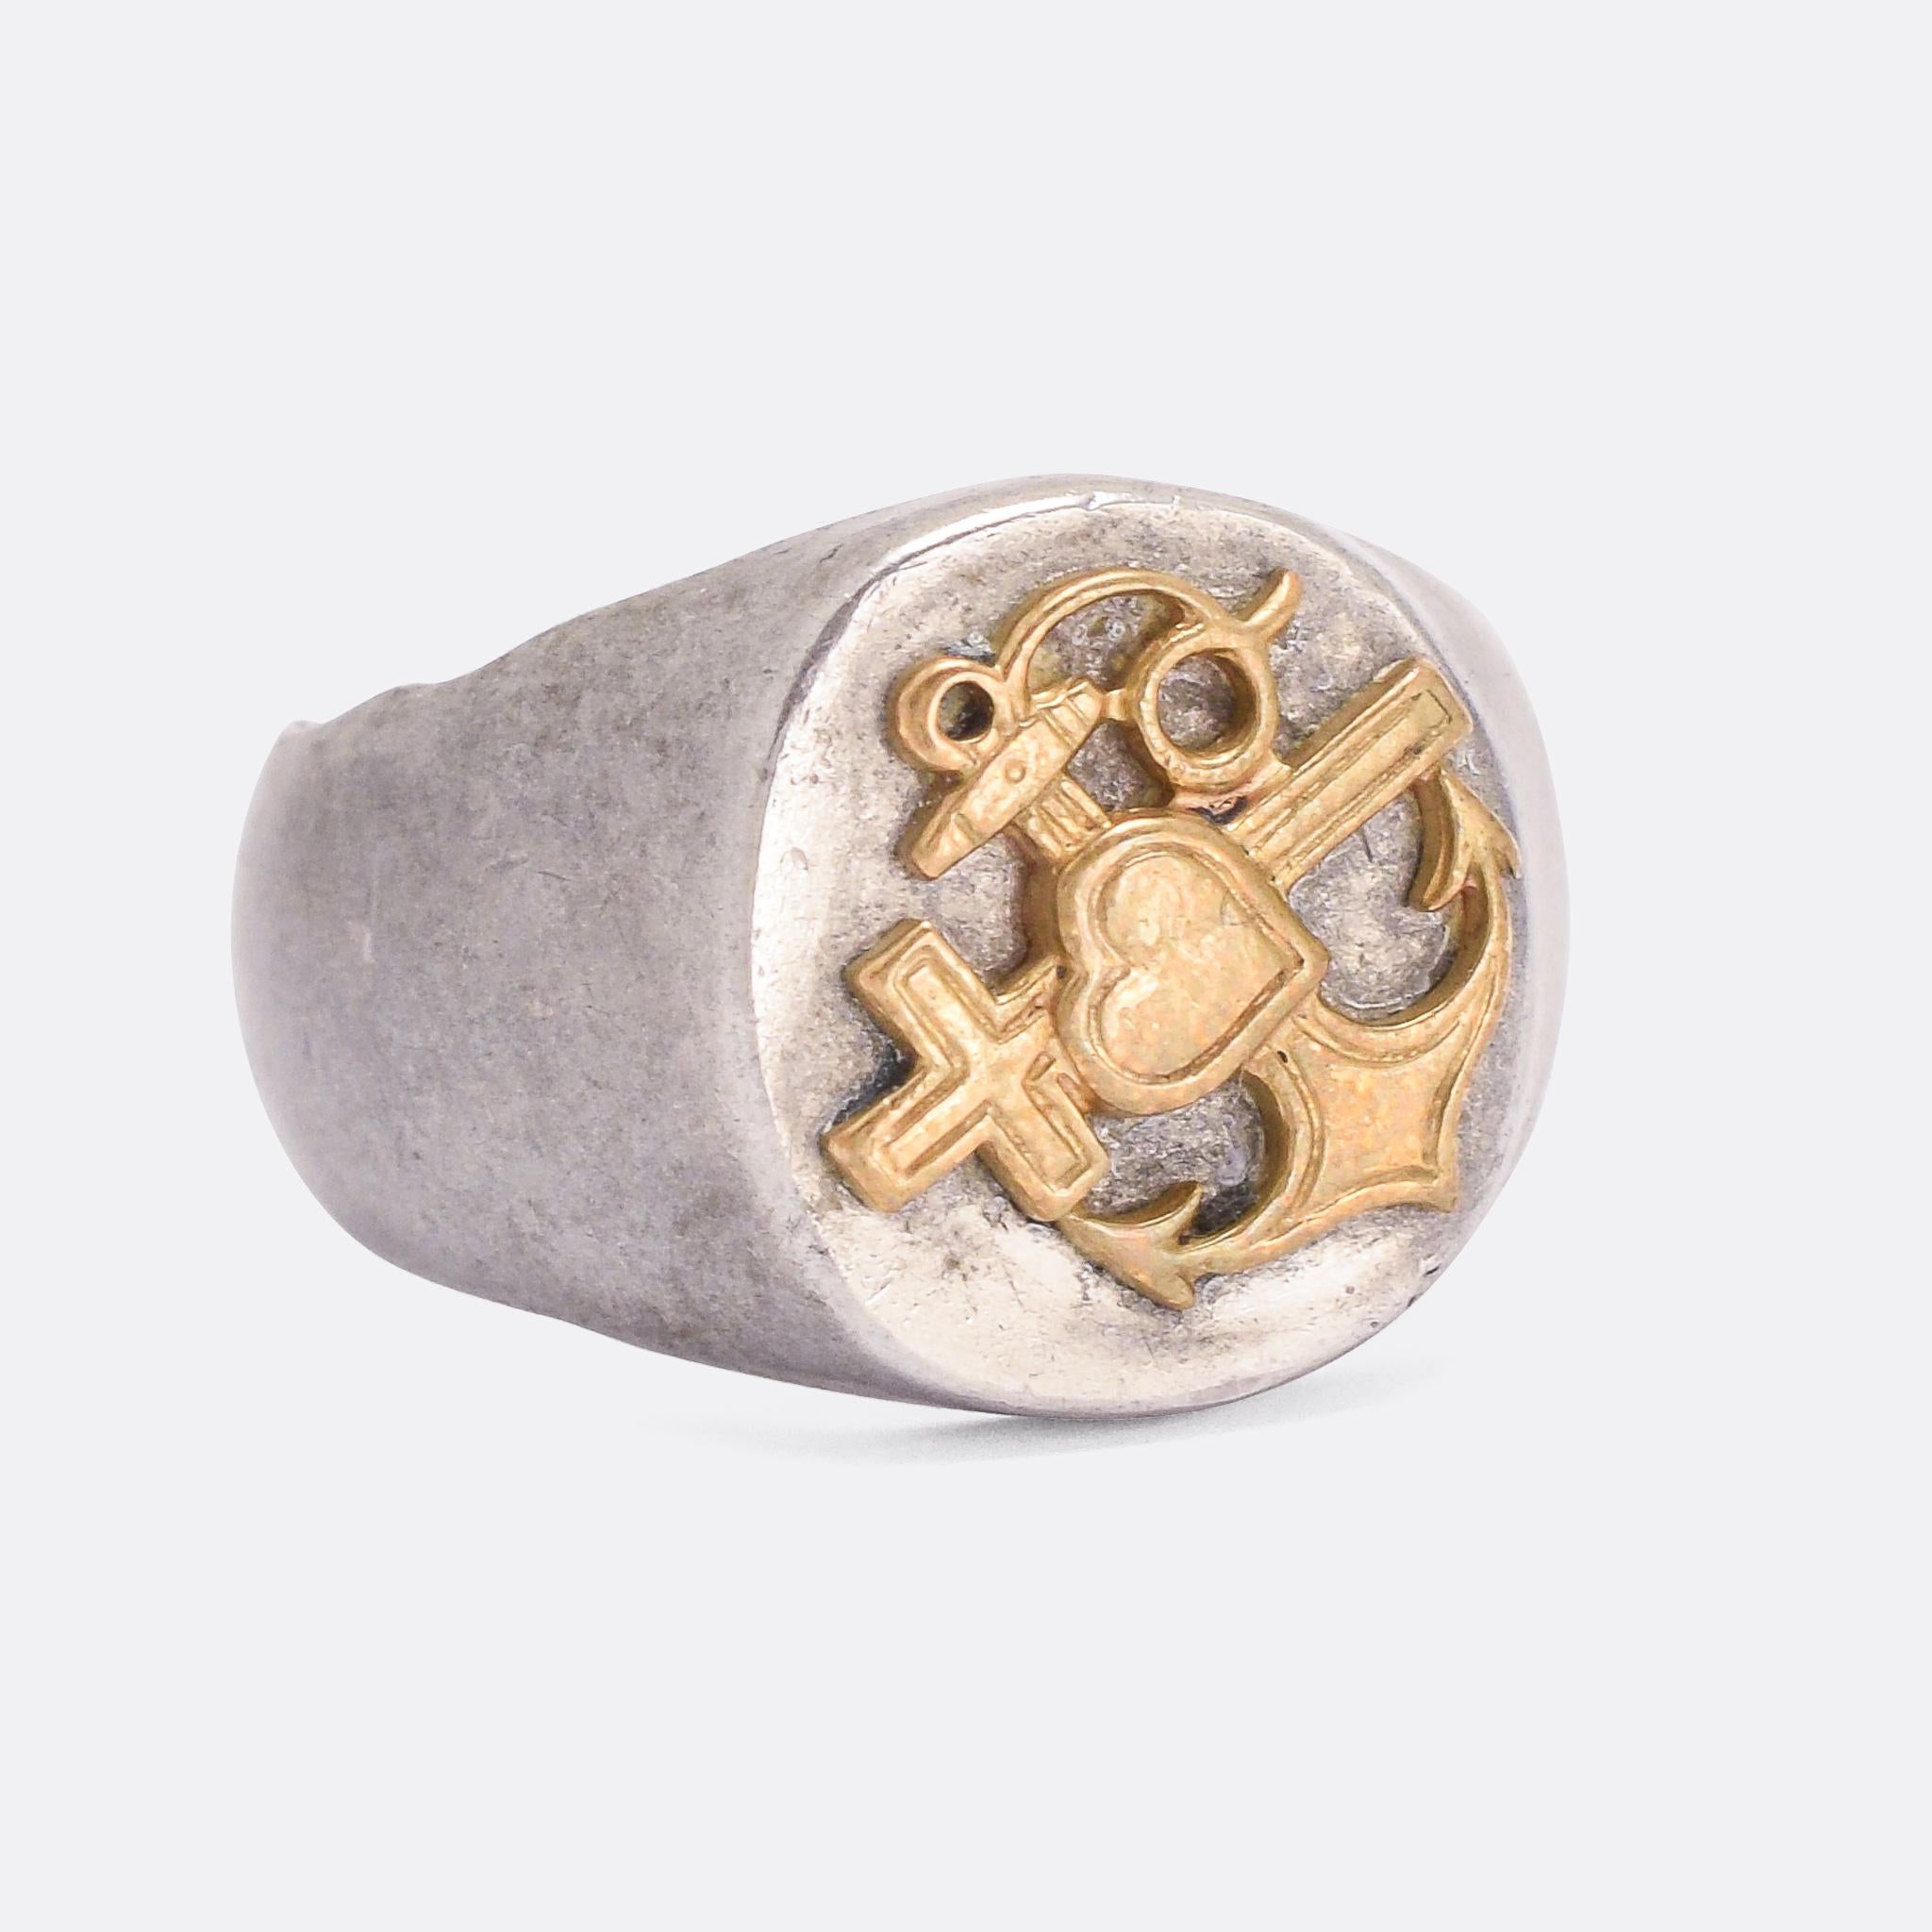 This signet ring is an unusual example of WW1 Trench Art. It's been crafted from the aluminum nose cone of a German artillery shell, with an applied Hope, Faith & Charity motif on the face (likely added once it had been sent back home). Pieces like